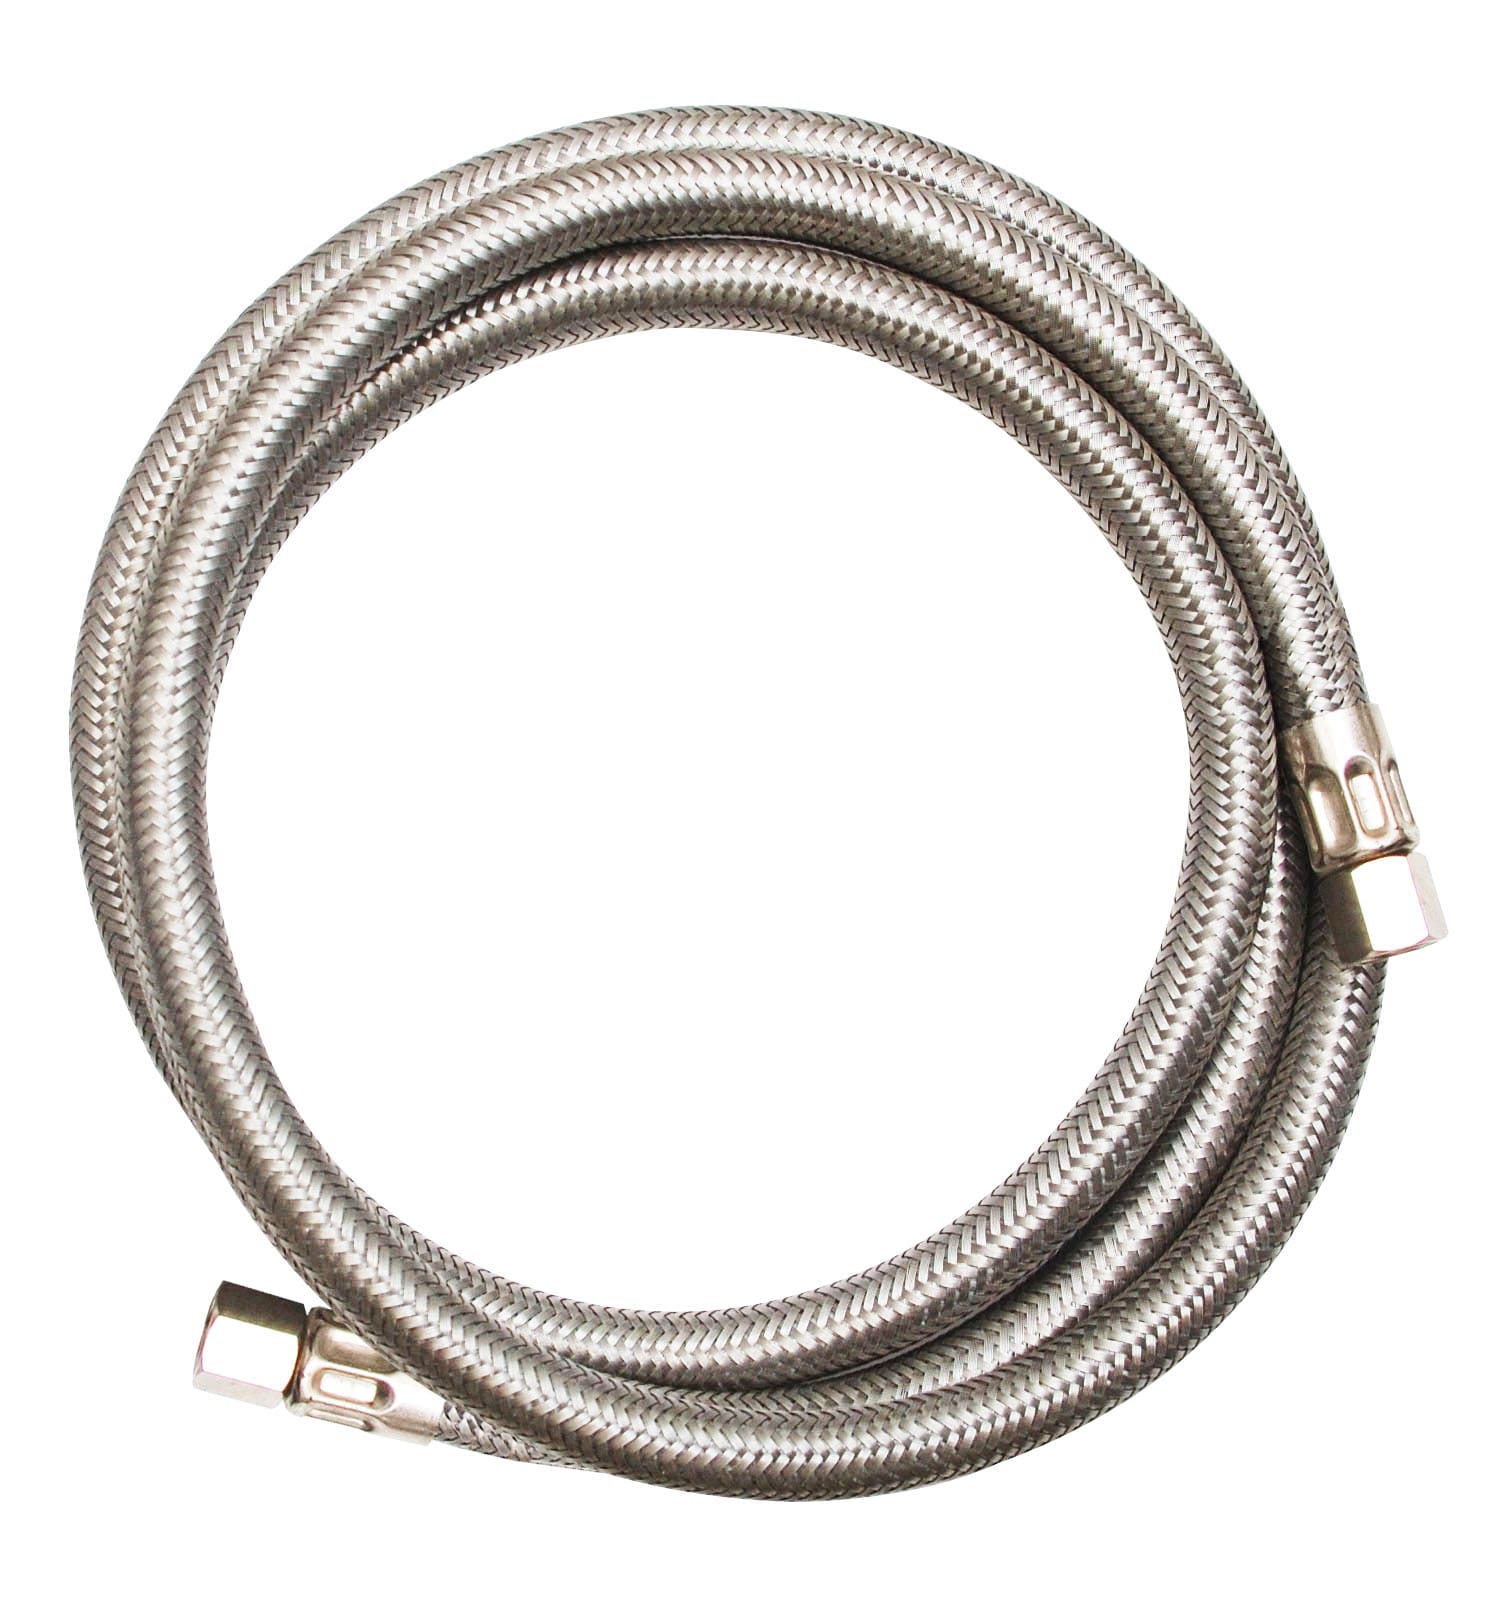 10ft Homewerks Ice Maker Connector Hose w Safety valve 1/4 to 1/4  connection